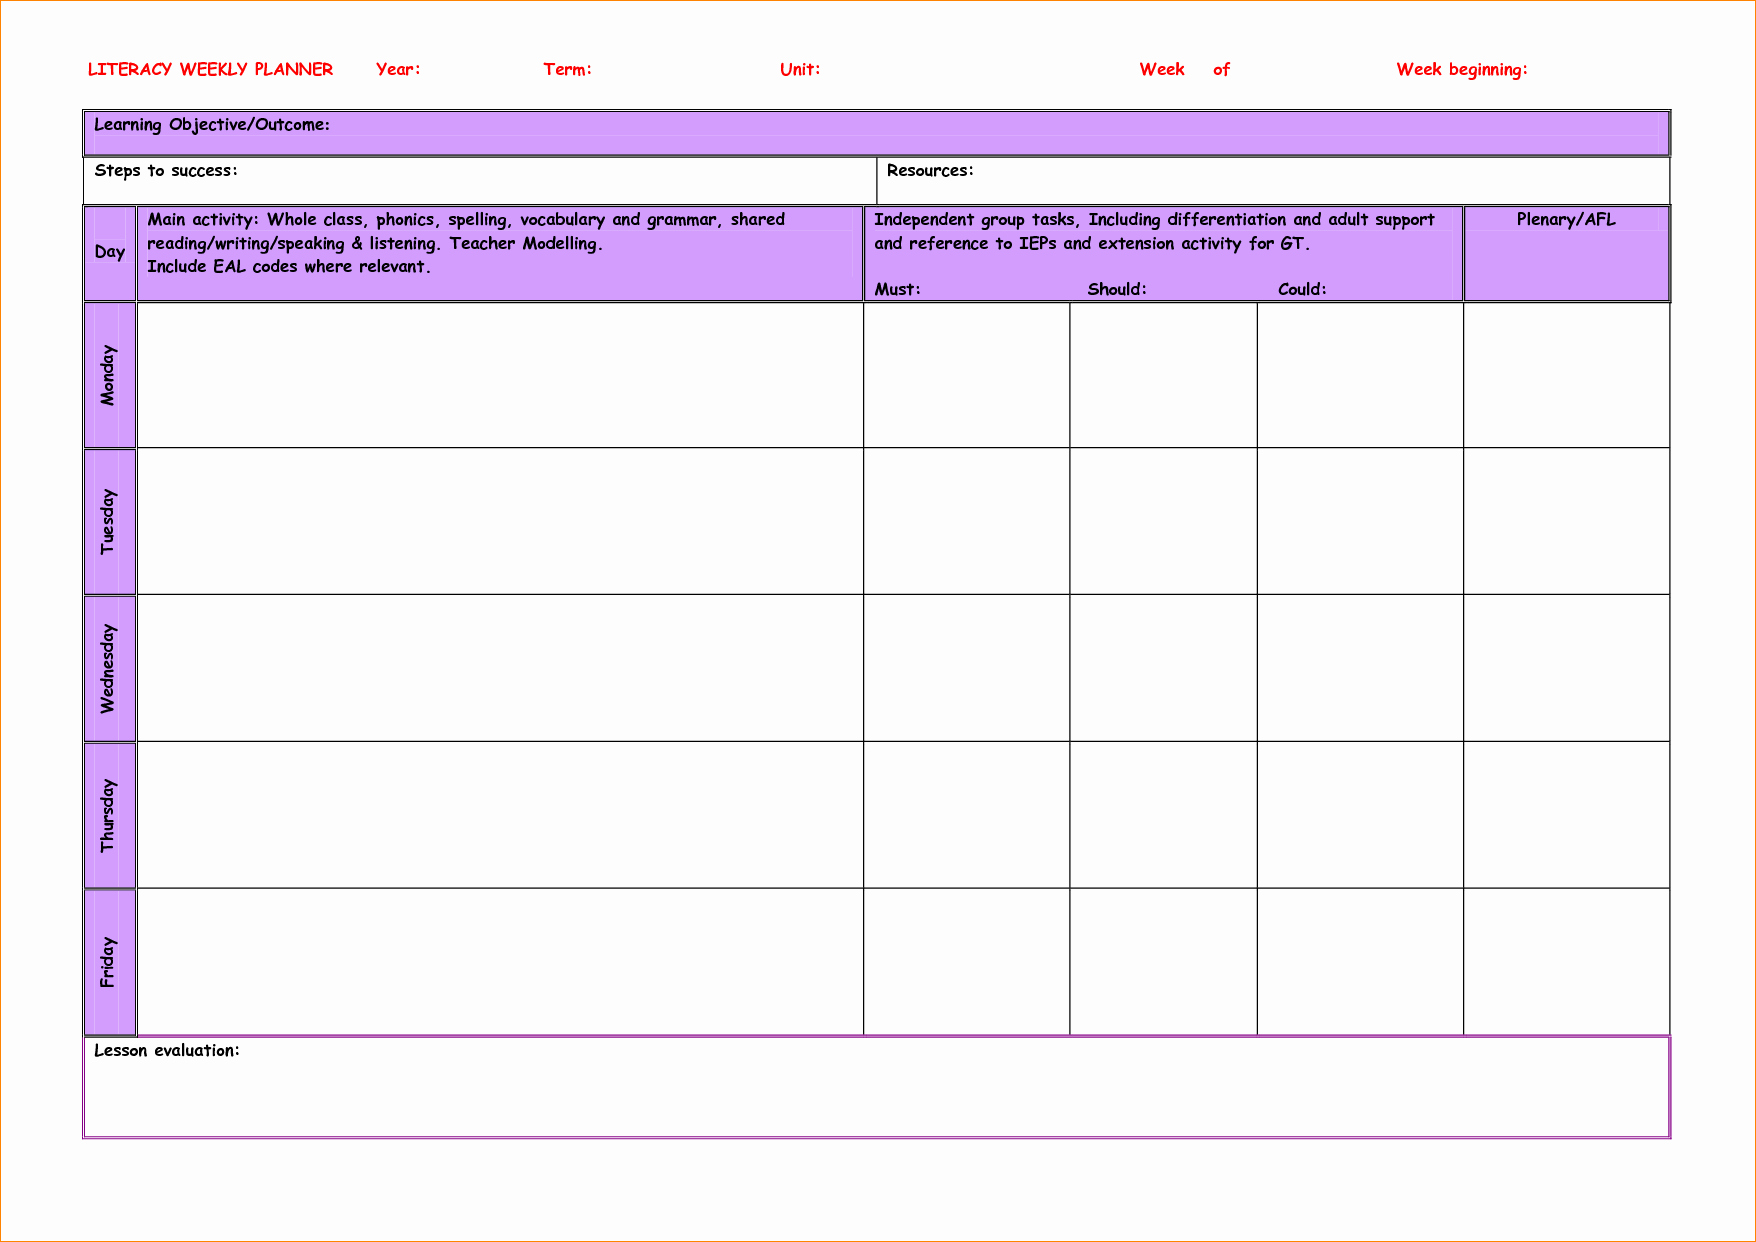 Weekly Planner Template for Teachers New Weekly Planner Template for Teachers